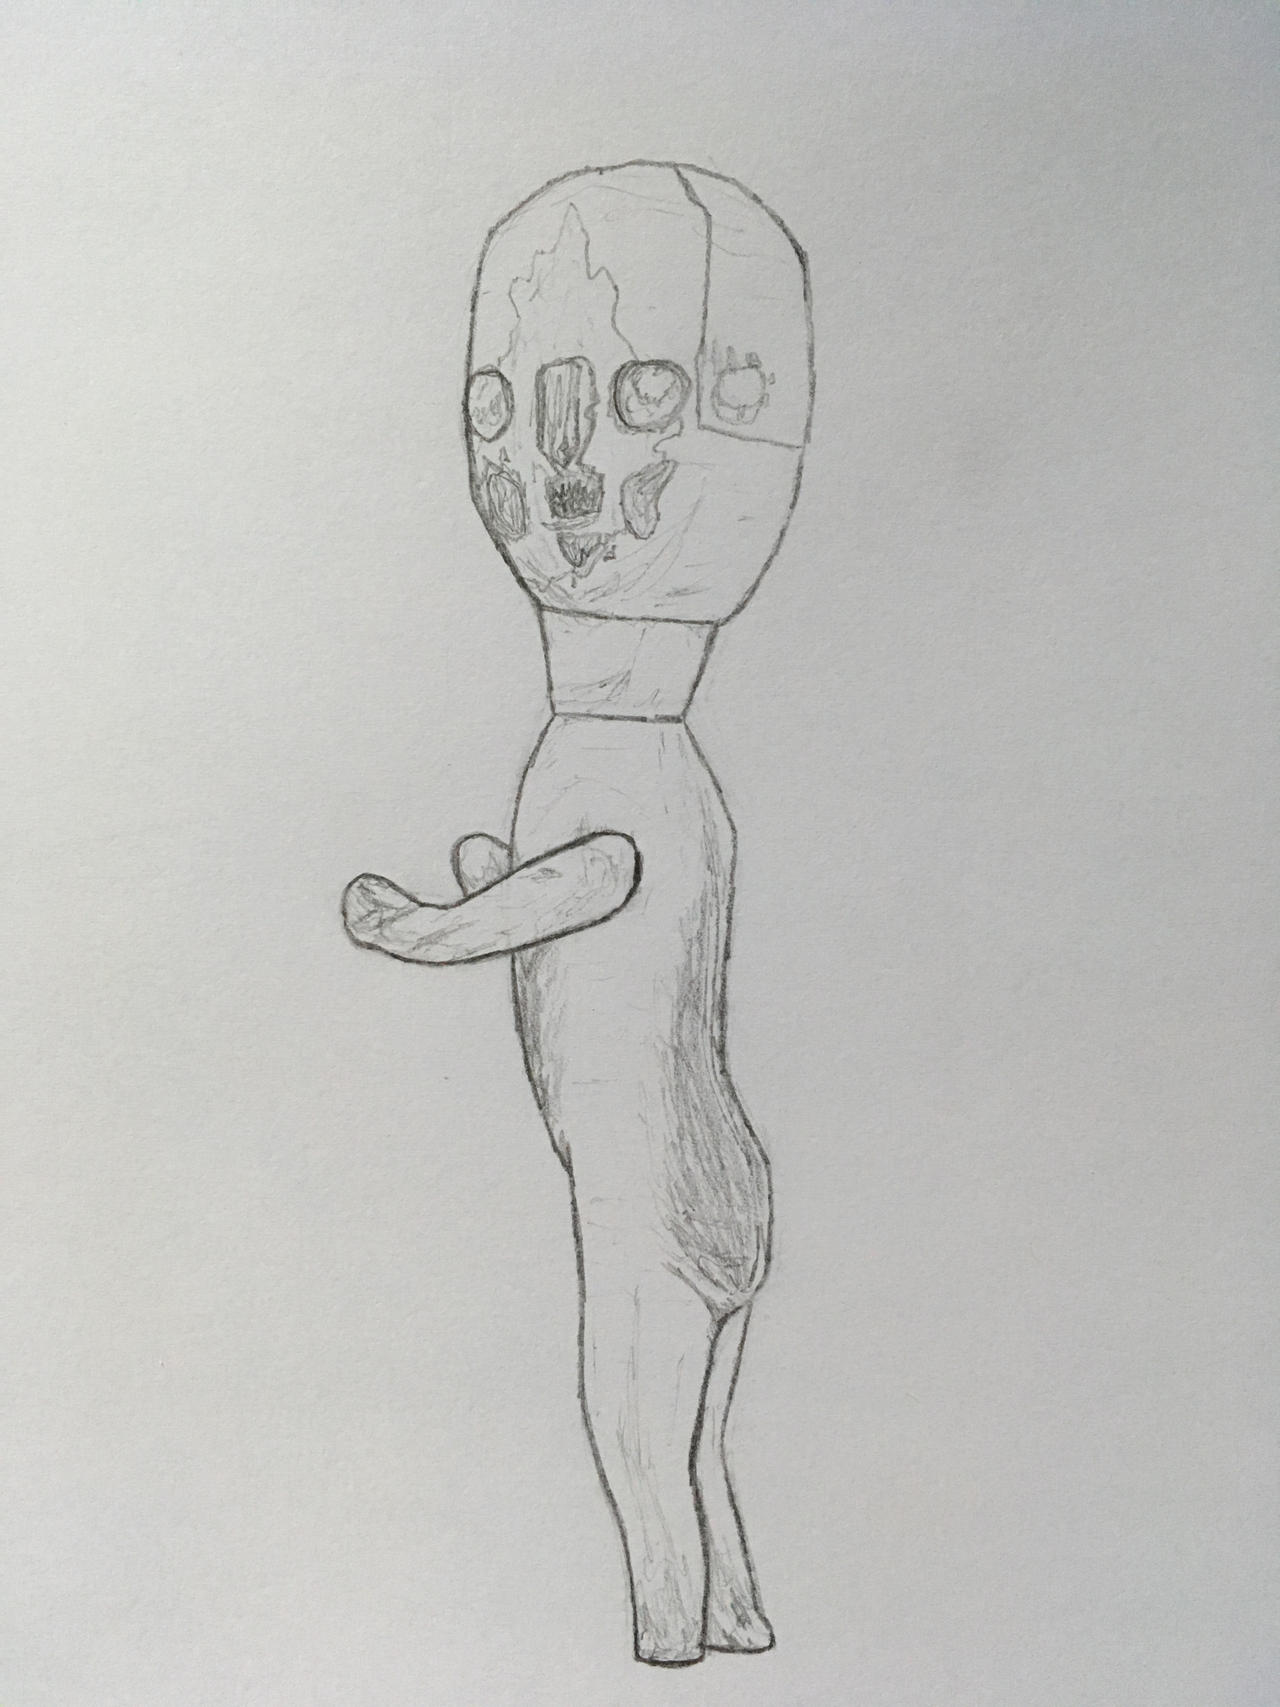 SCP-173 The Sculpture by JohnDraw54 on DeviantArt